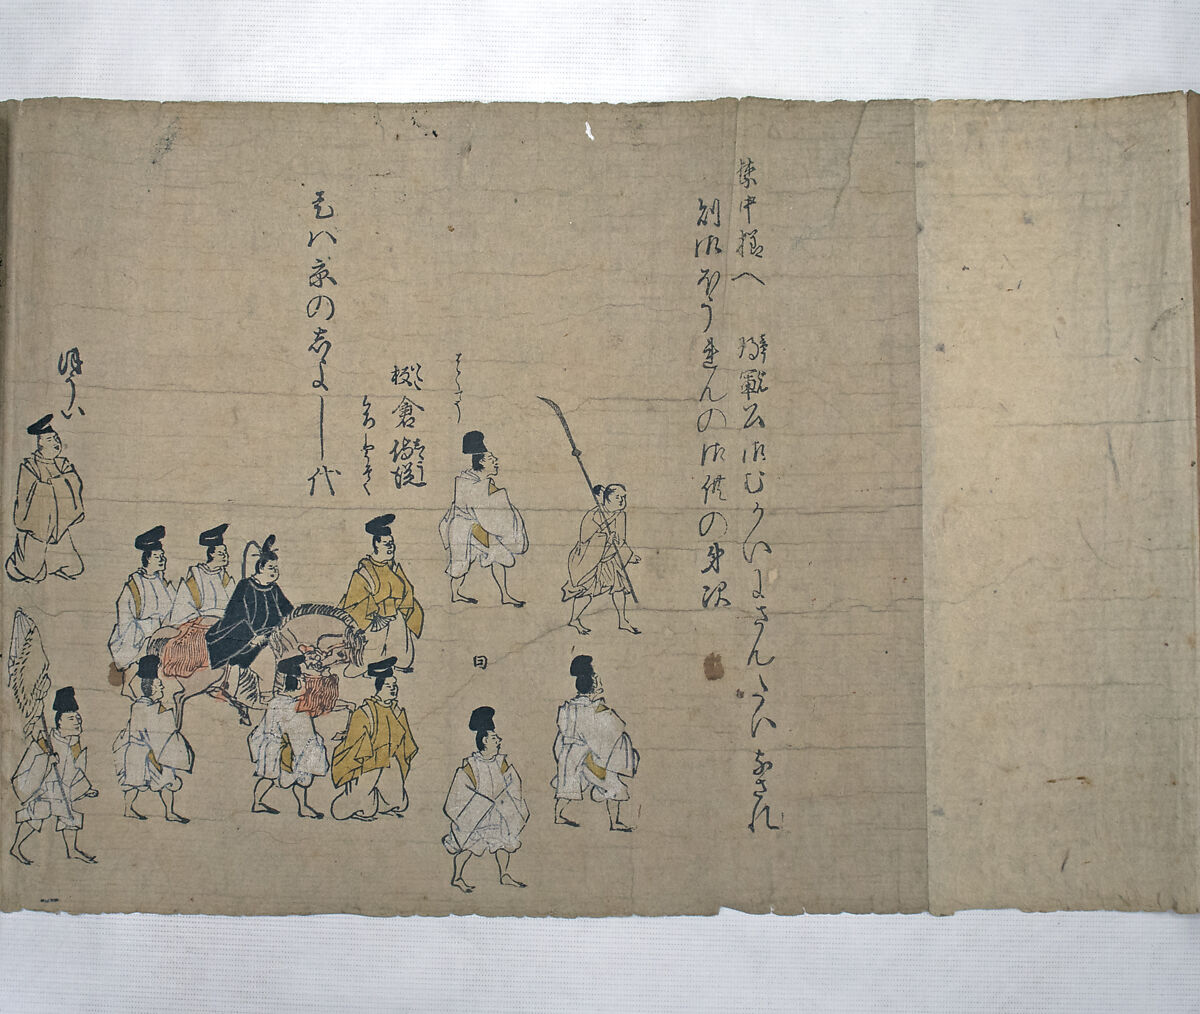 Procession of the Emperor and Suite, Kano School, One of a set of two handscrolls; ink and color on paper, hand-tinted, Japan 